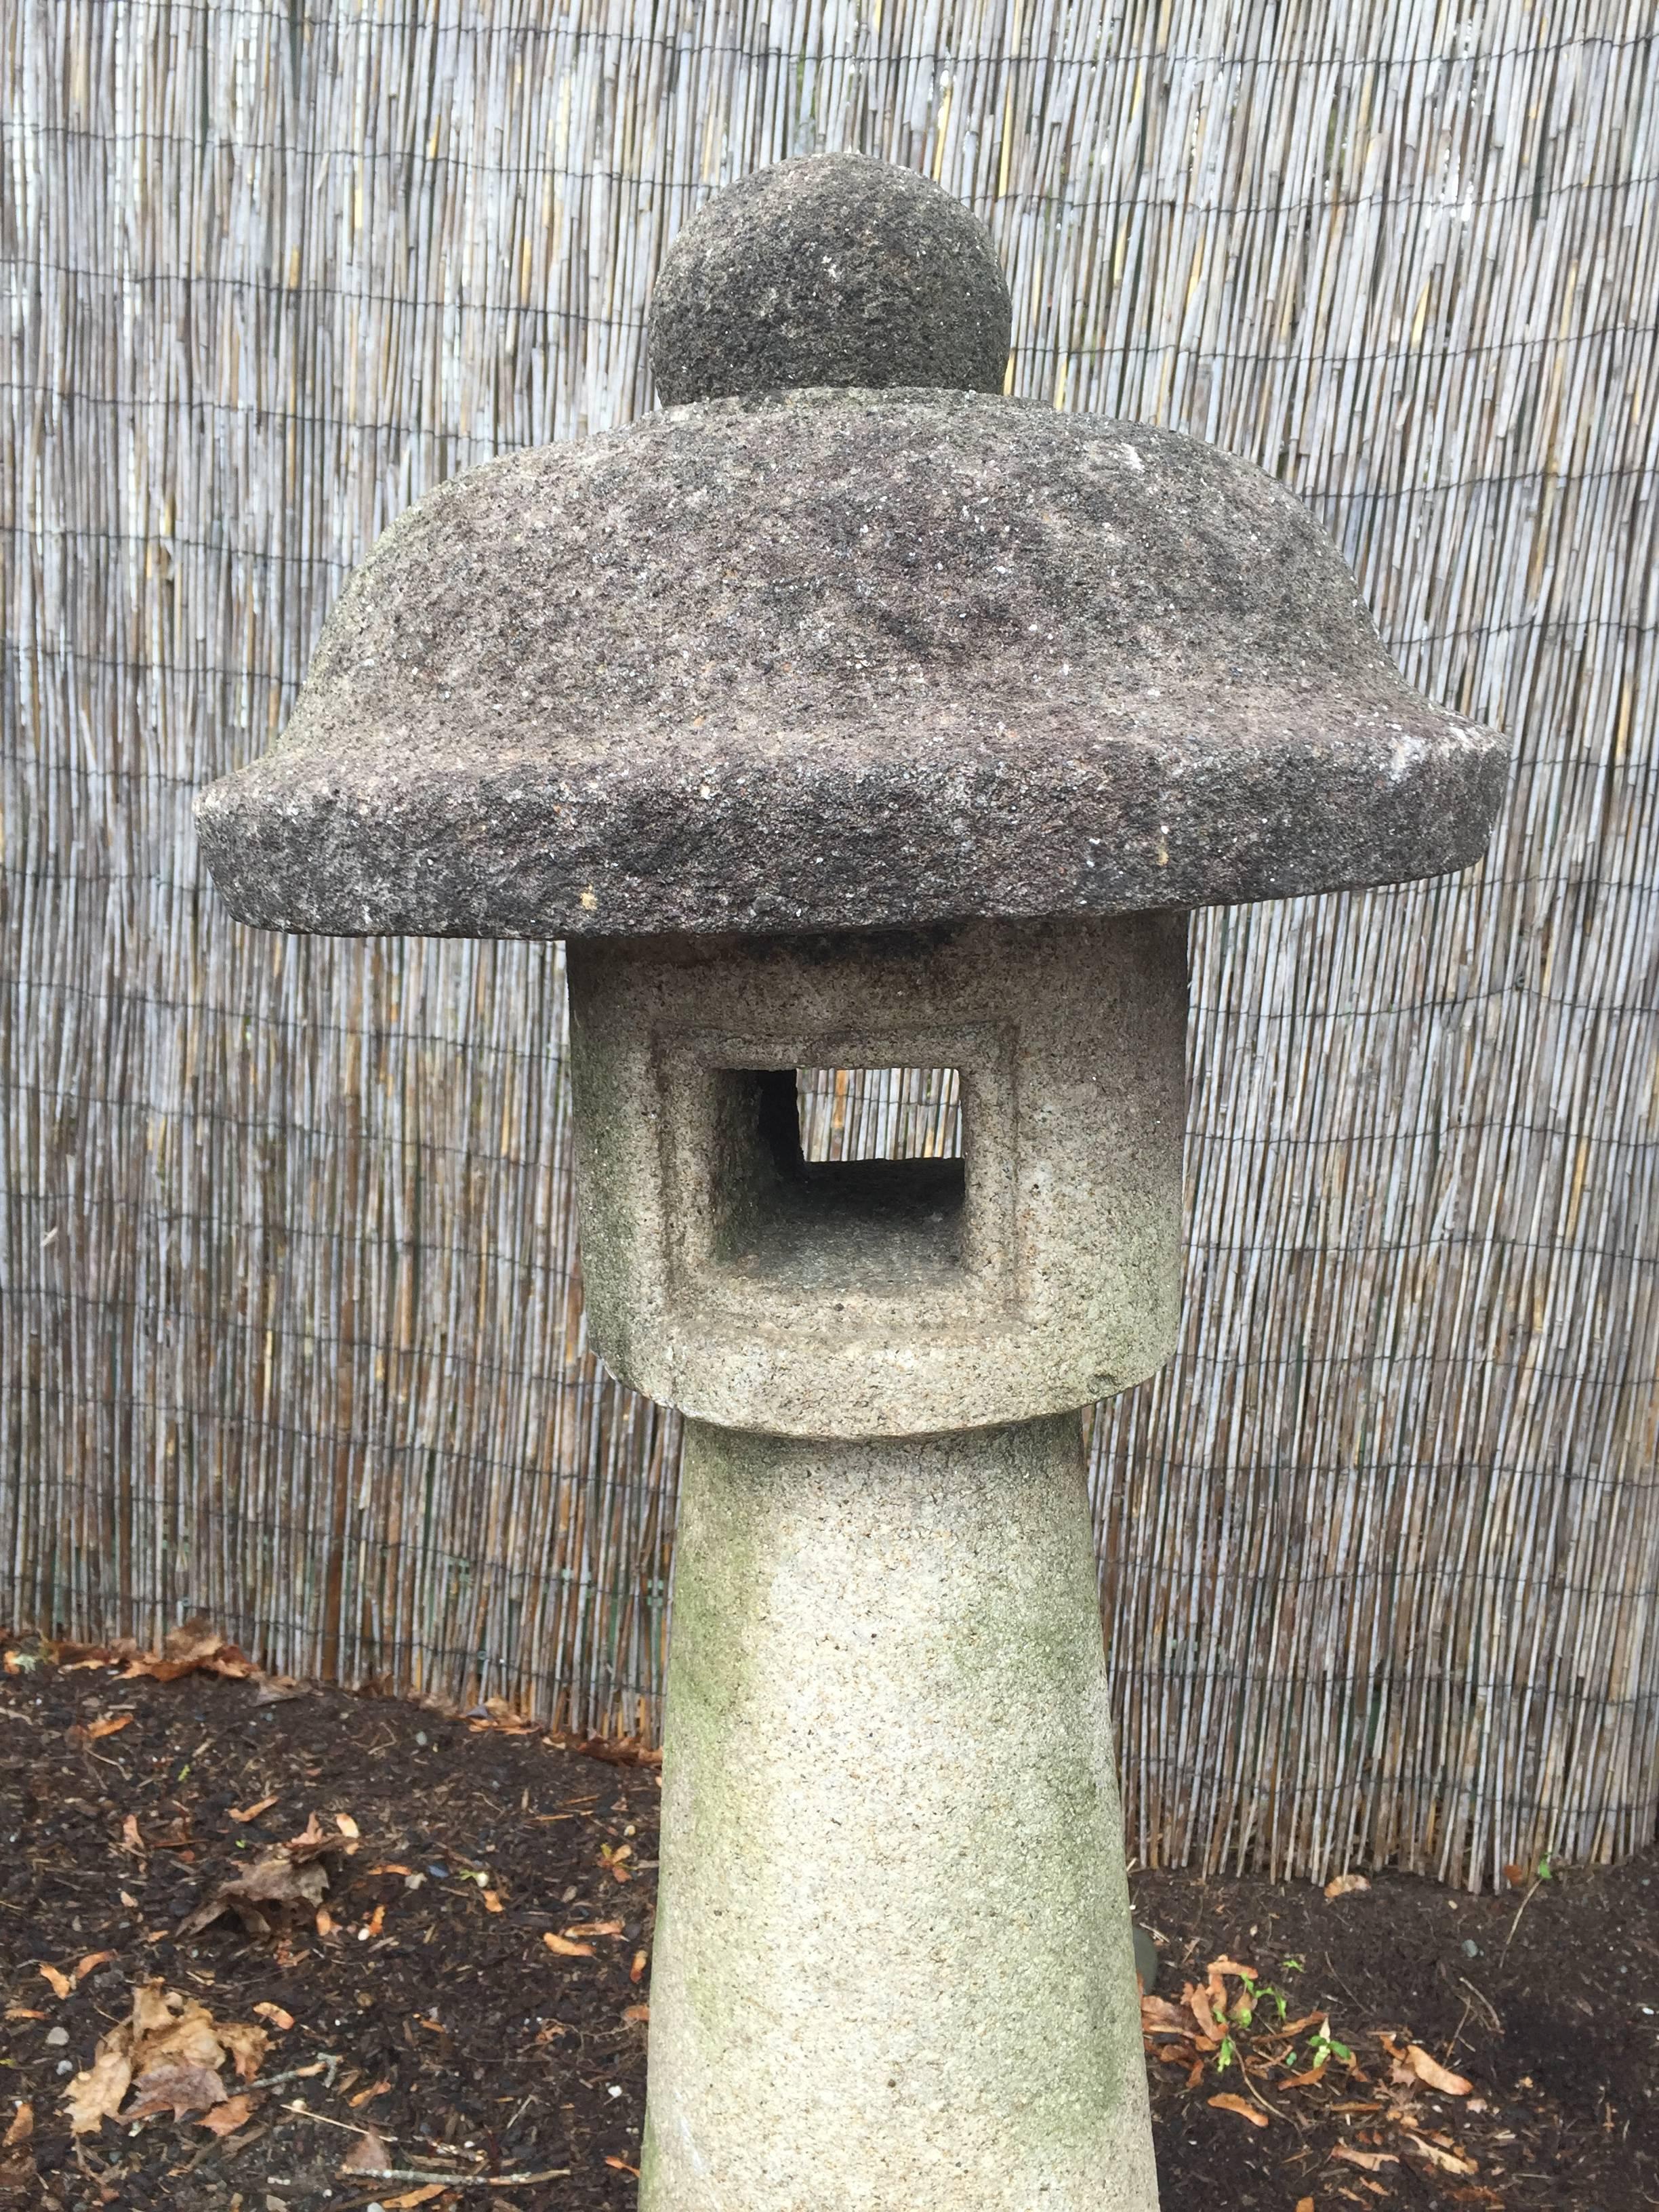 Japan, a tall elegant and scarce hand carved stone lantern dating to the 1920s. This 36 inch high by 20 inch diameter lantern is wonderful in its design simplicity and would be appropriate for any Mid-Century Modern, arts and crafts or traditional